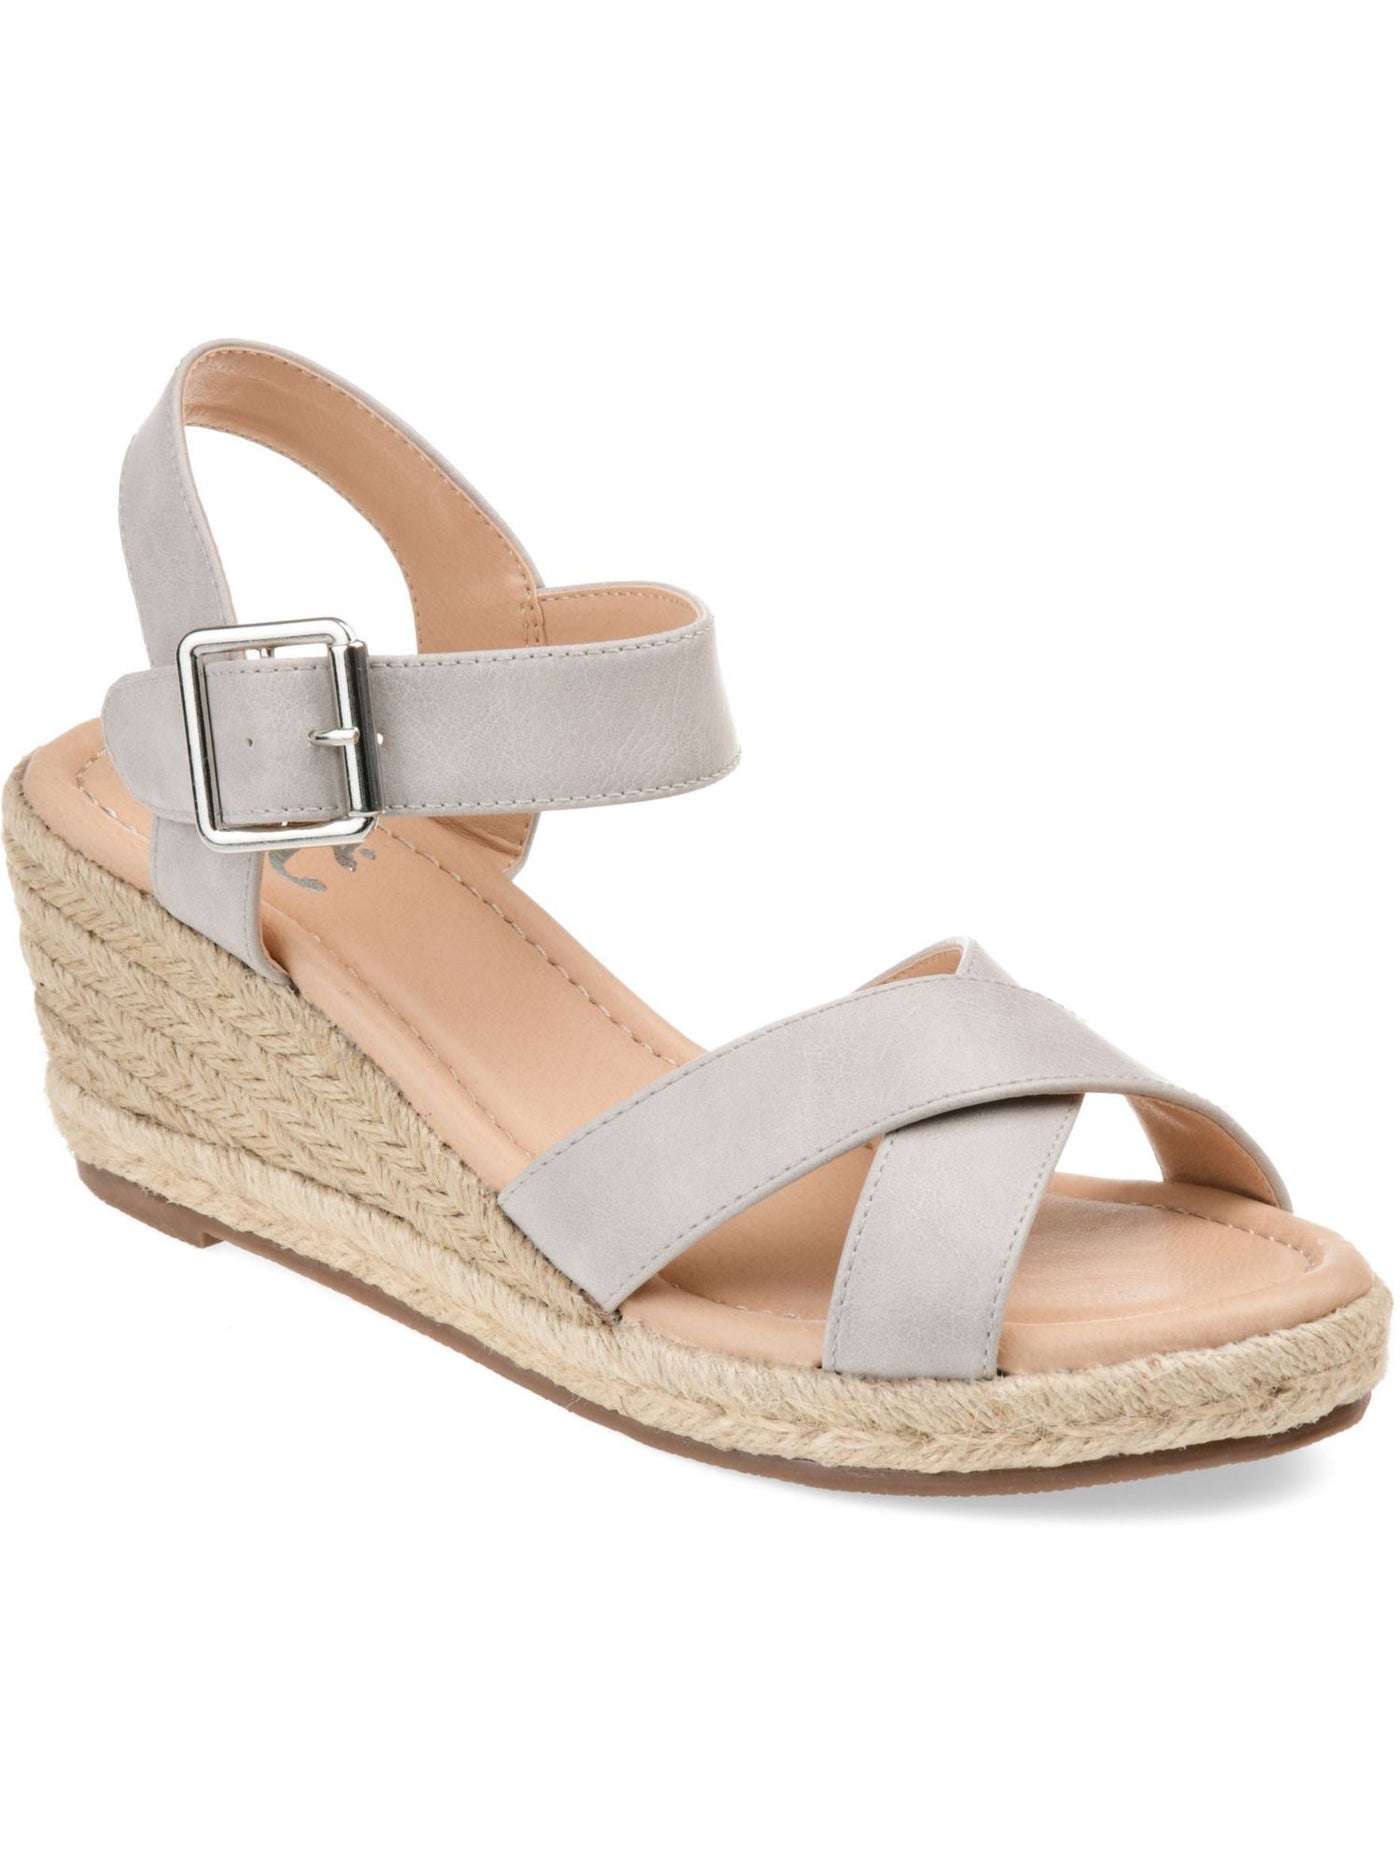 JOURNEE COLLECTION Womens Gray 1" Platfomrm Cushioned Strappy Dryden Round Toe Wedge Buckle Espadrille Shoes 10 M